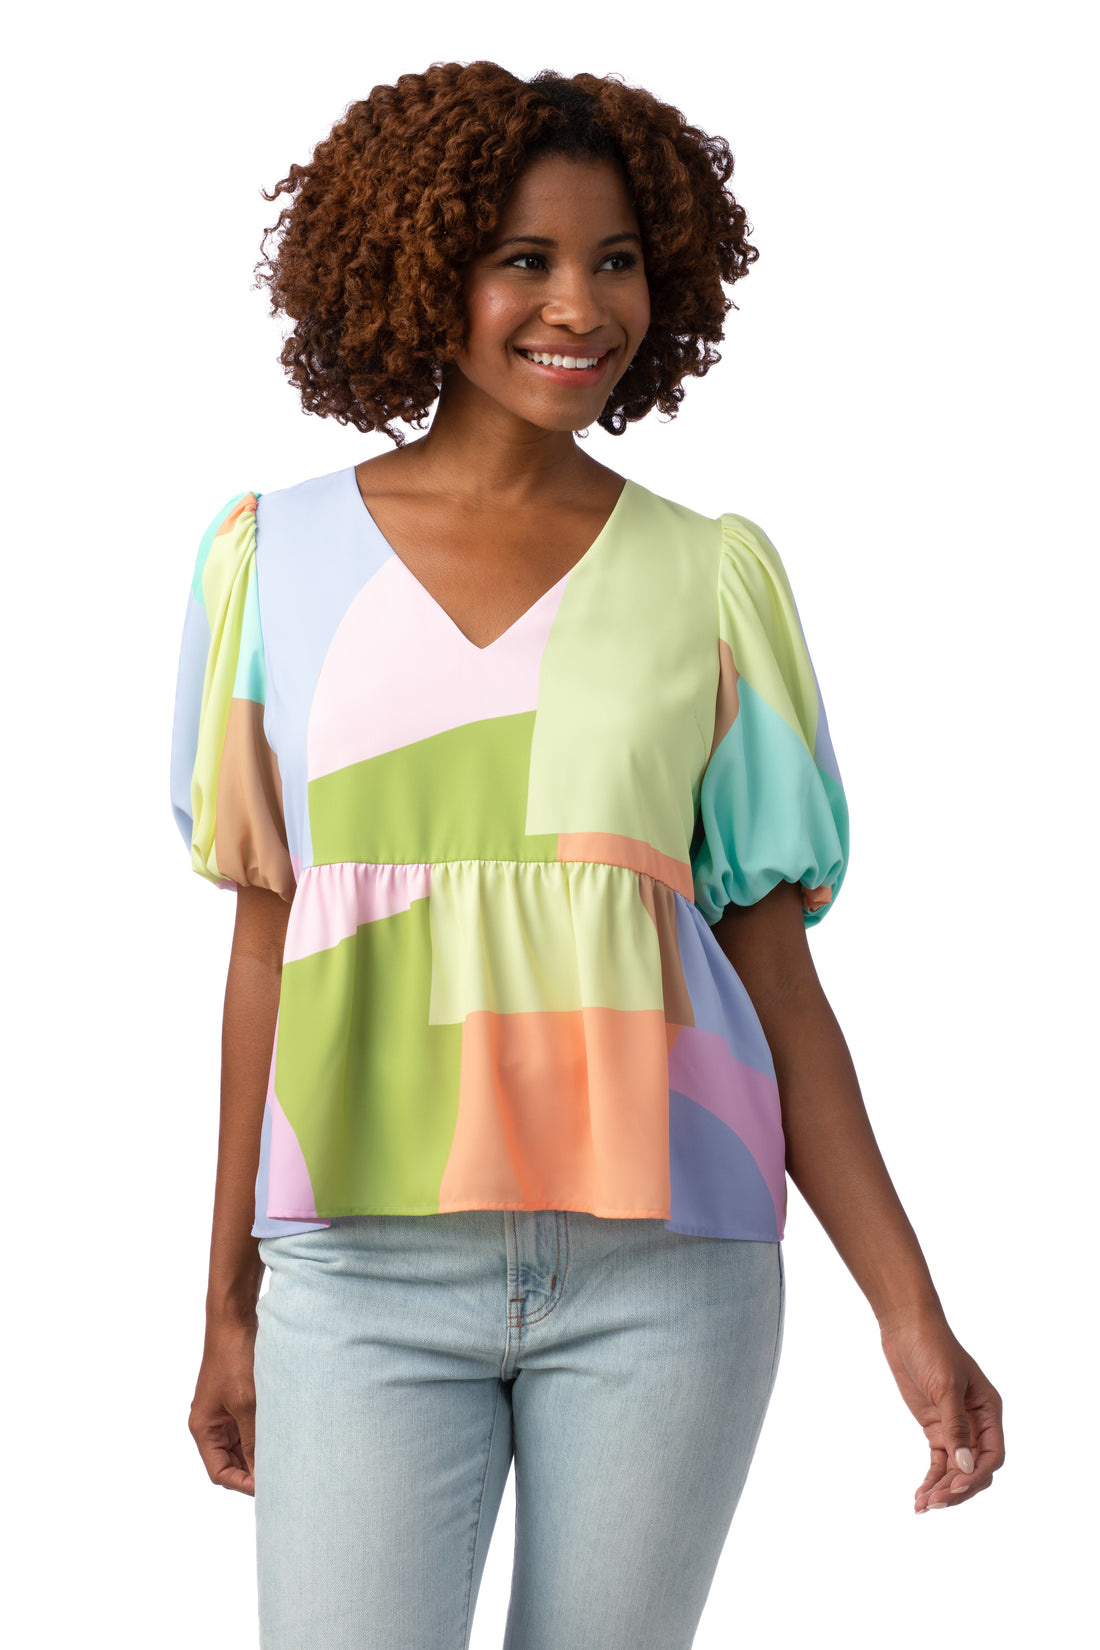 Crosby By Mollie Burch Jackie Top Sunset Colorblock